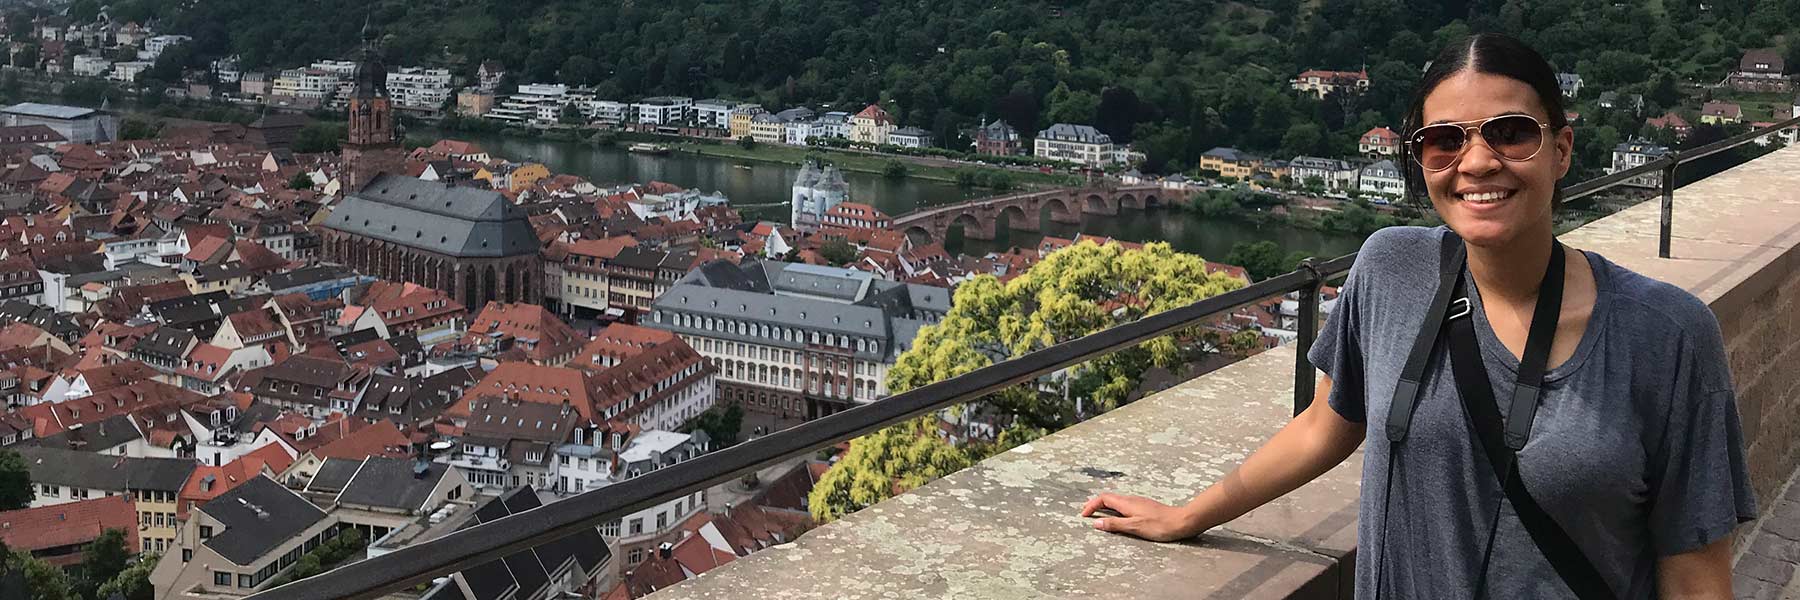 A student leans on a wall overlooking a European city.